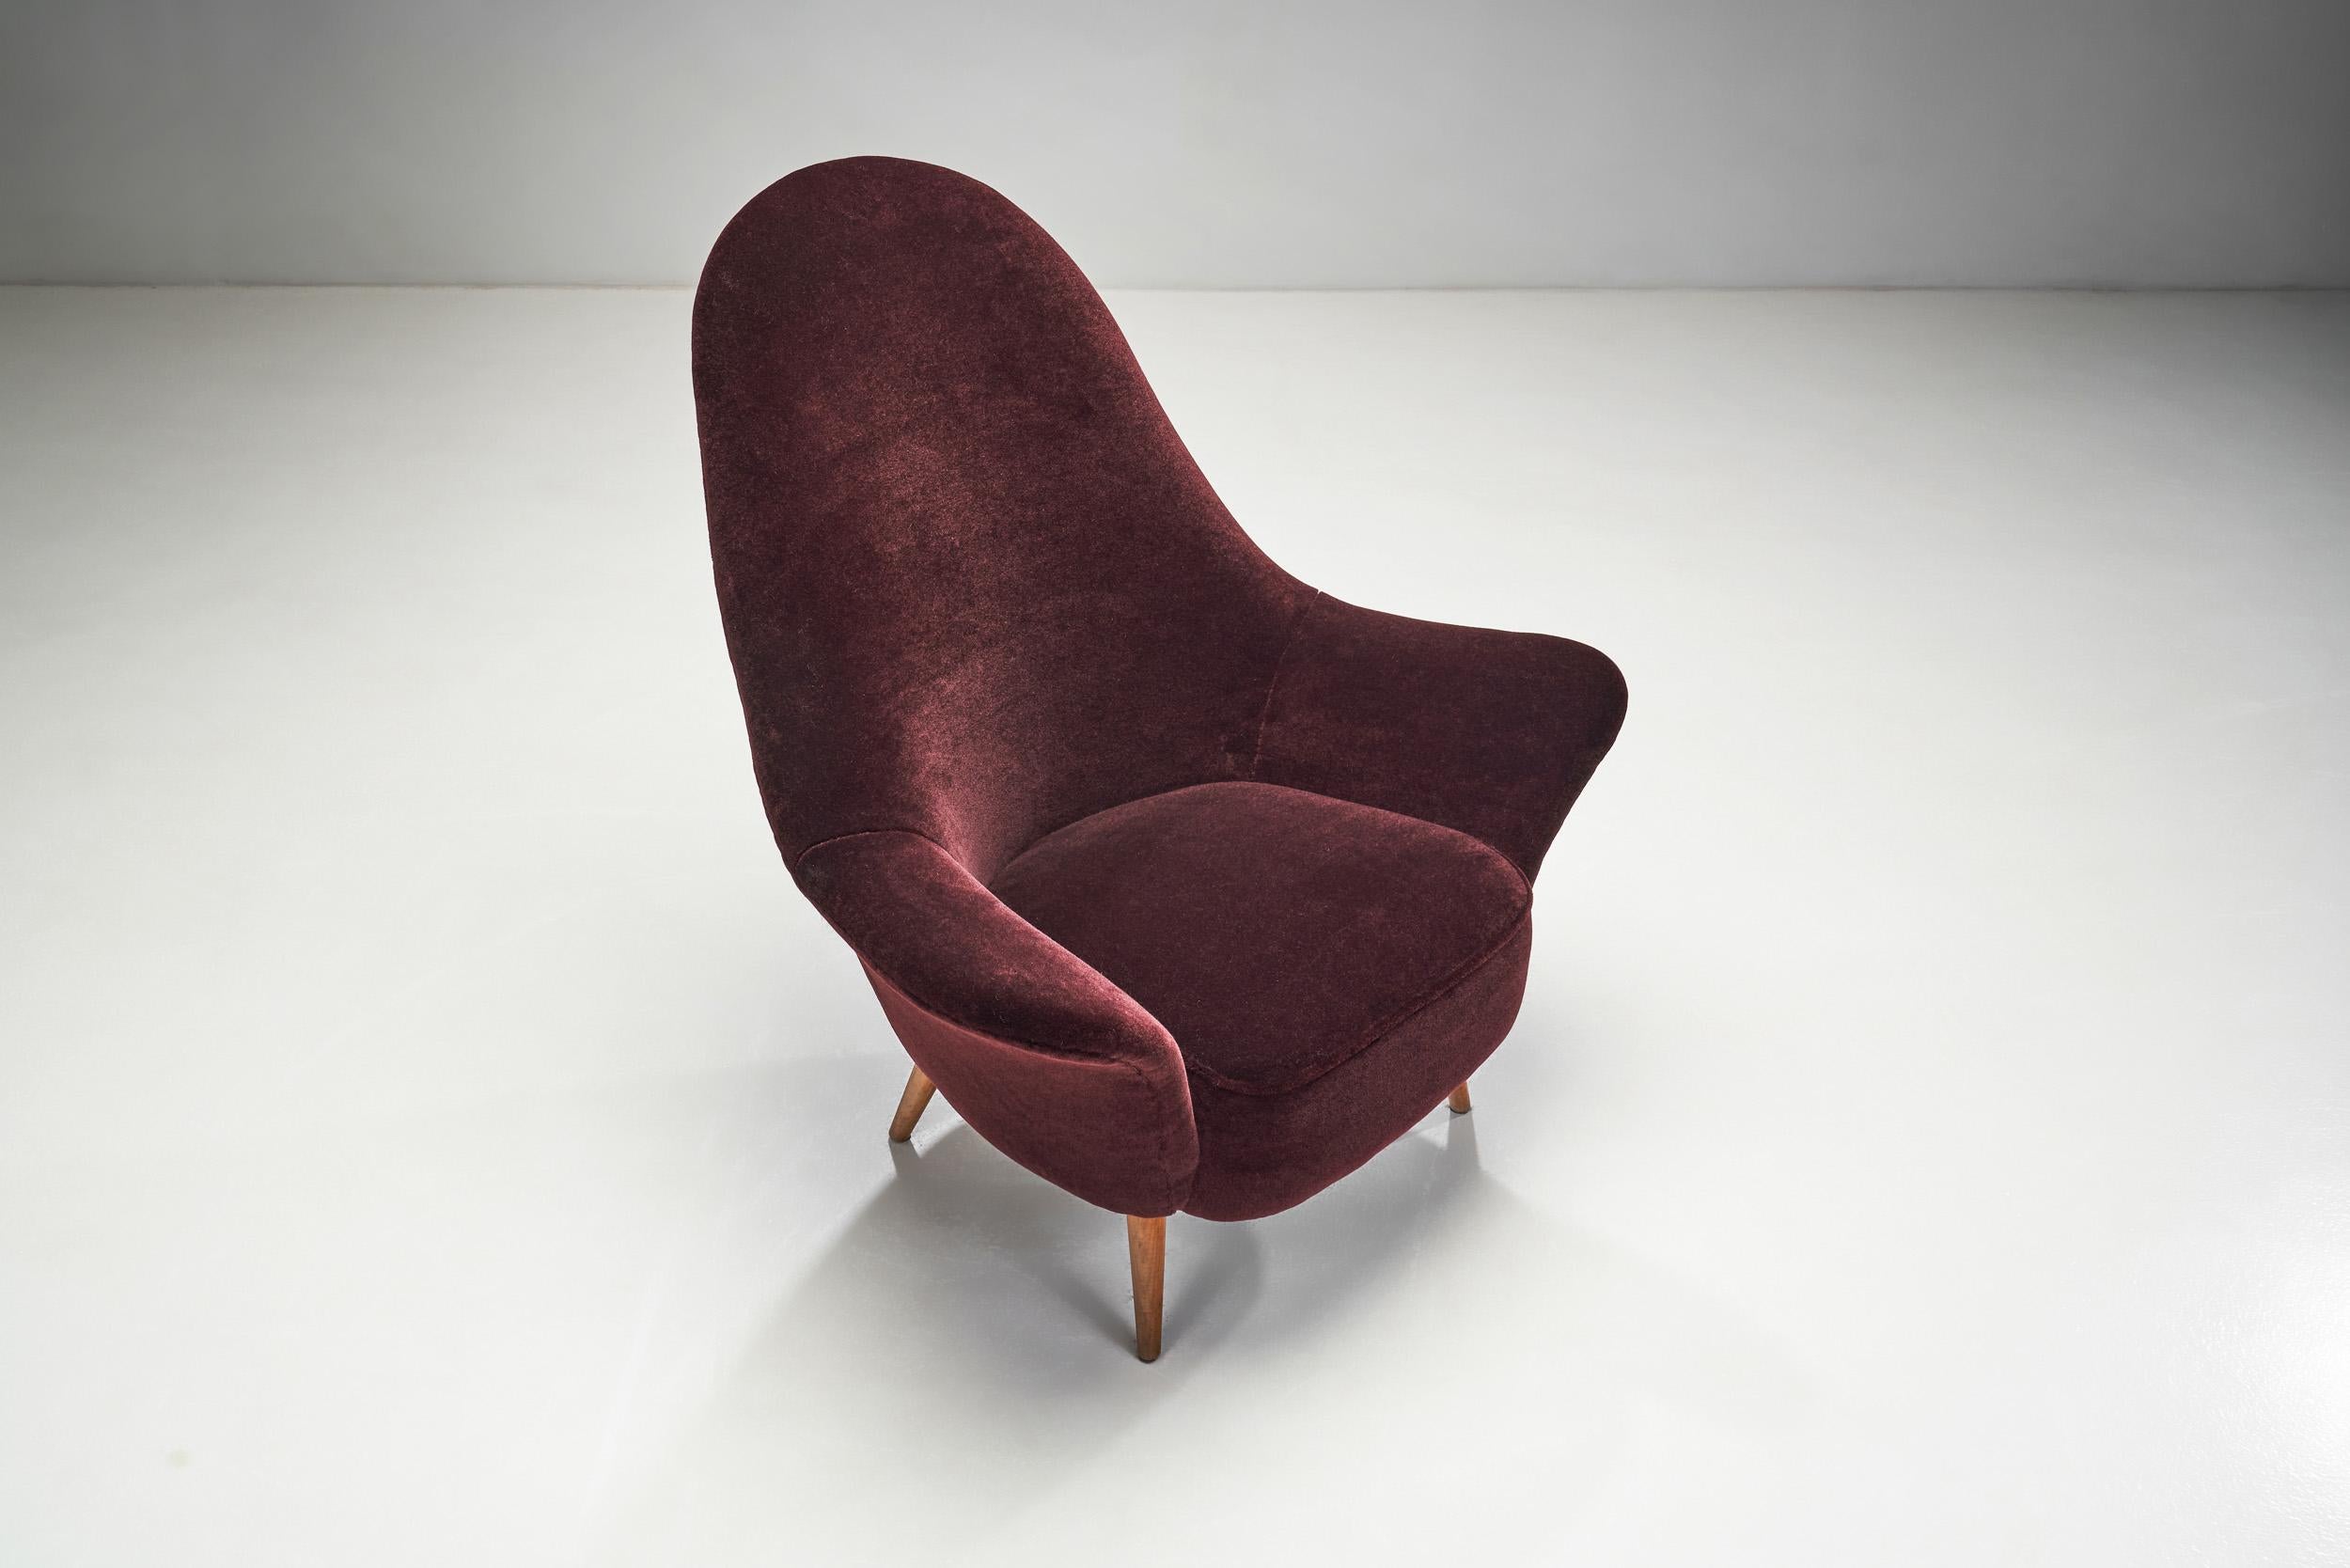 French Lounge Chairs In Aubergine Coloured Mohair, France ca 1960s For Sale 2